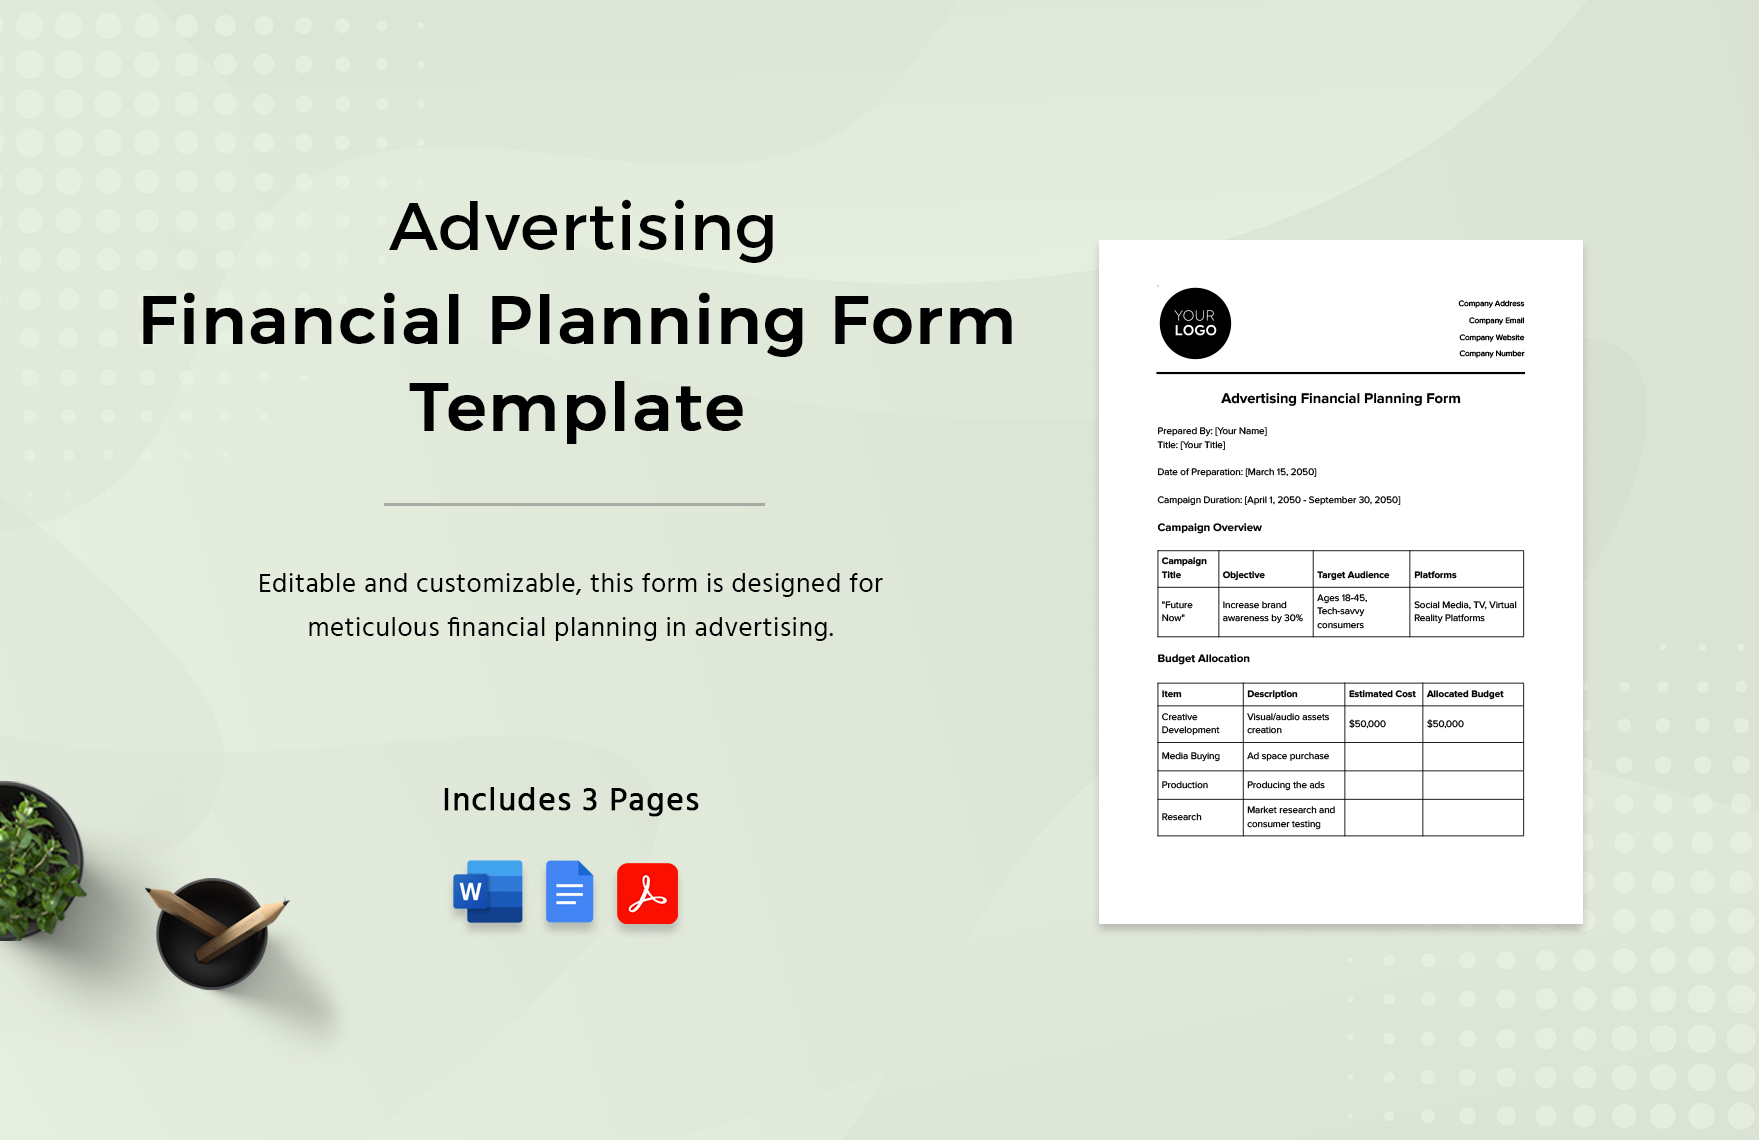 Advertising Financial Planning Form Template